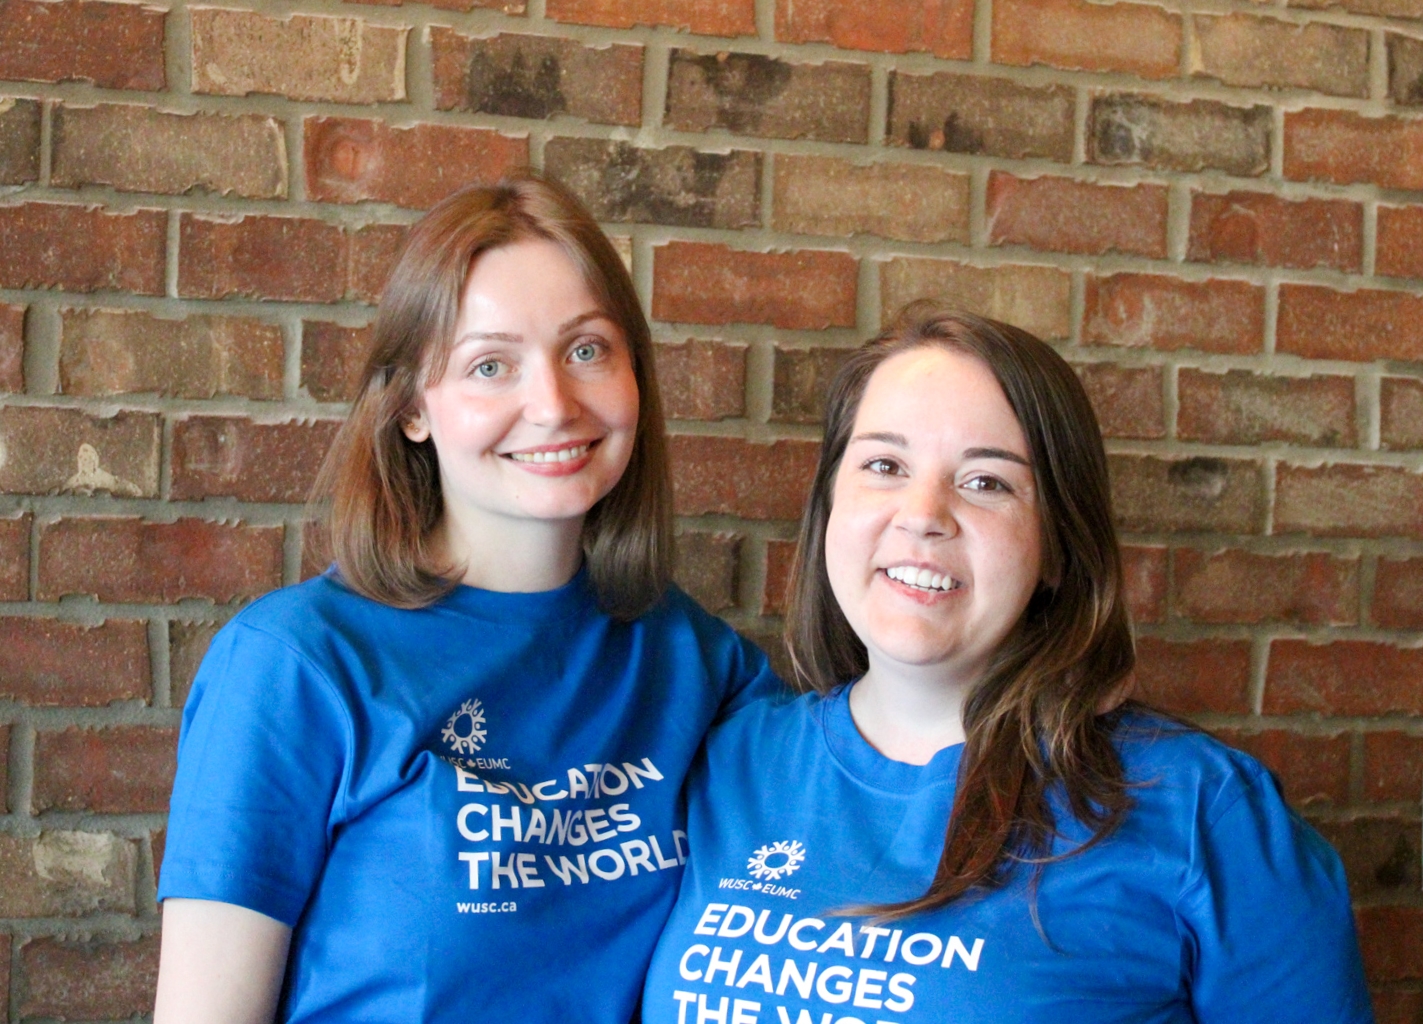 Amy Winterburn, right, and Victoria Zaremba, left, are students in the social service worker program and volunteers on the WUSC local committee.